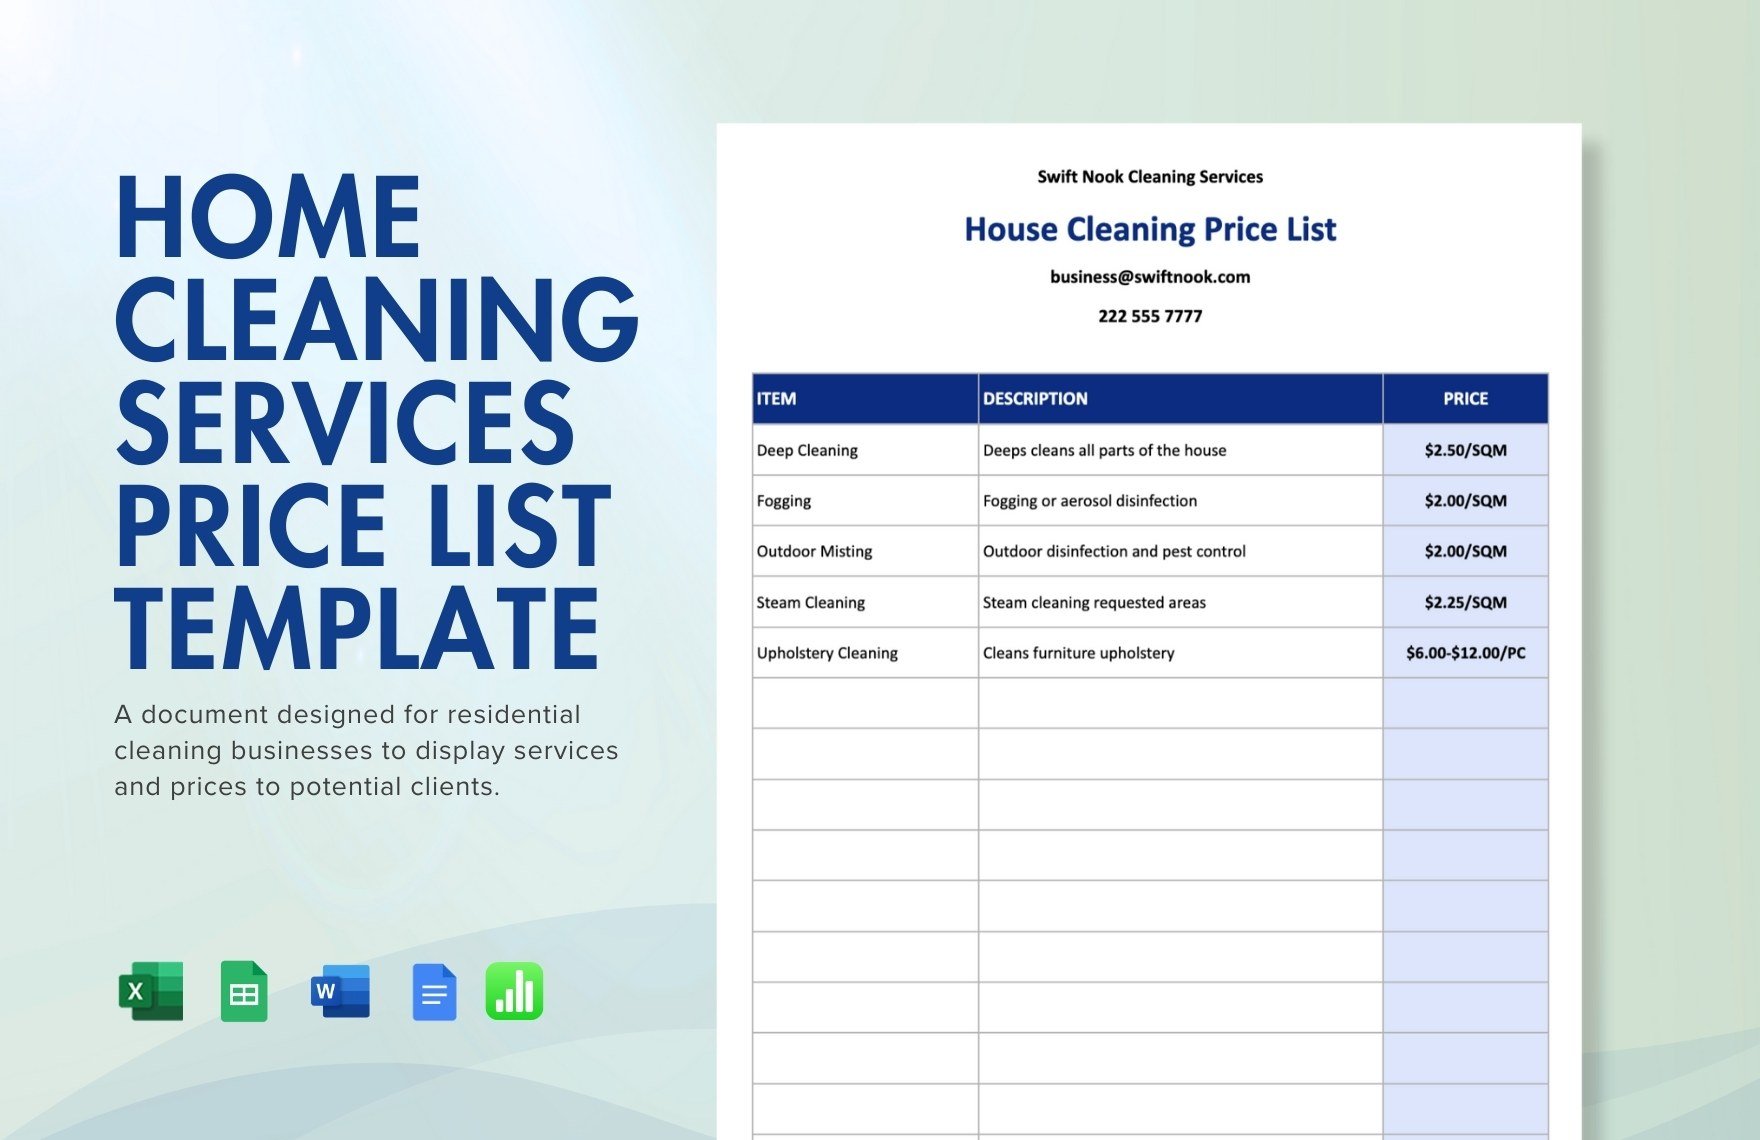 Home Cleaning Services Price List Template in Word, Google Docs, Excel, Google Sheets, Apple Numbers